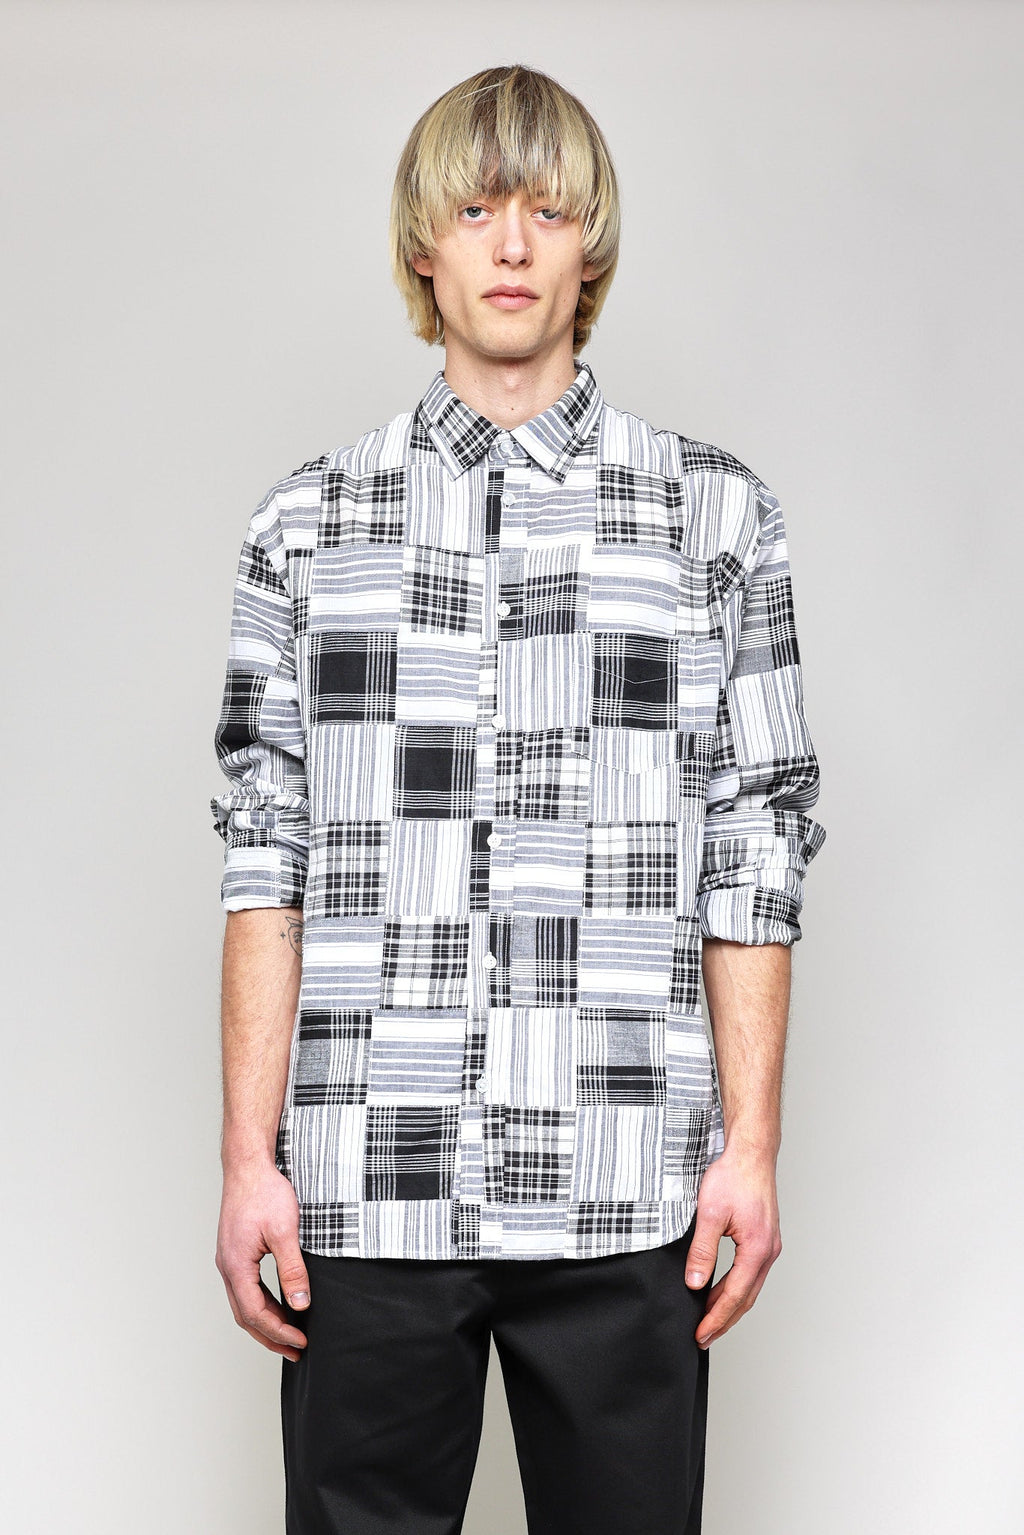 Japanese Patchwork Plaid in Black and White 01